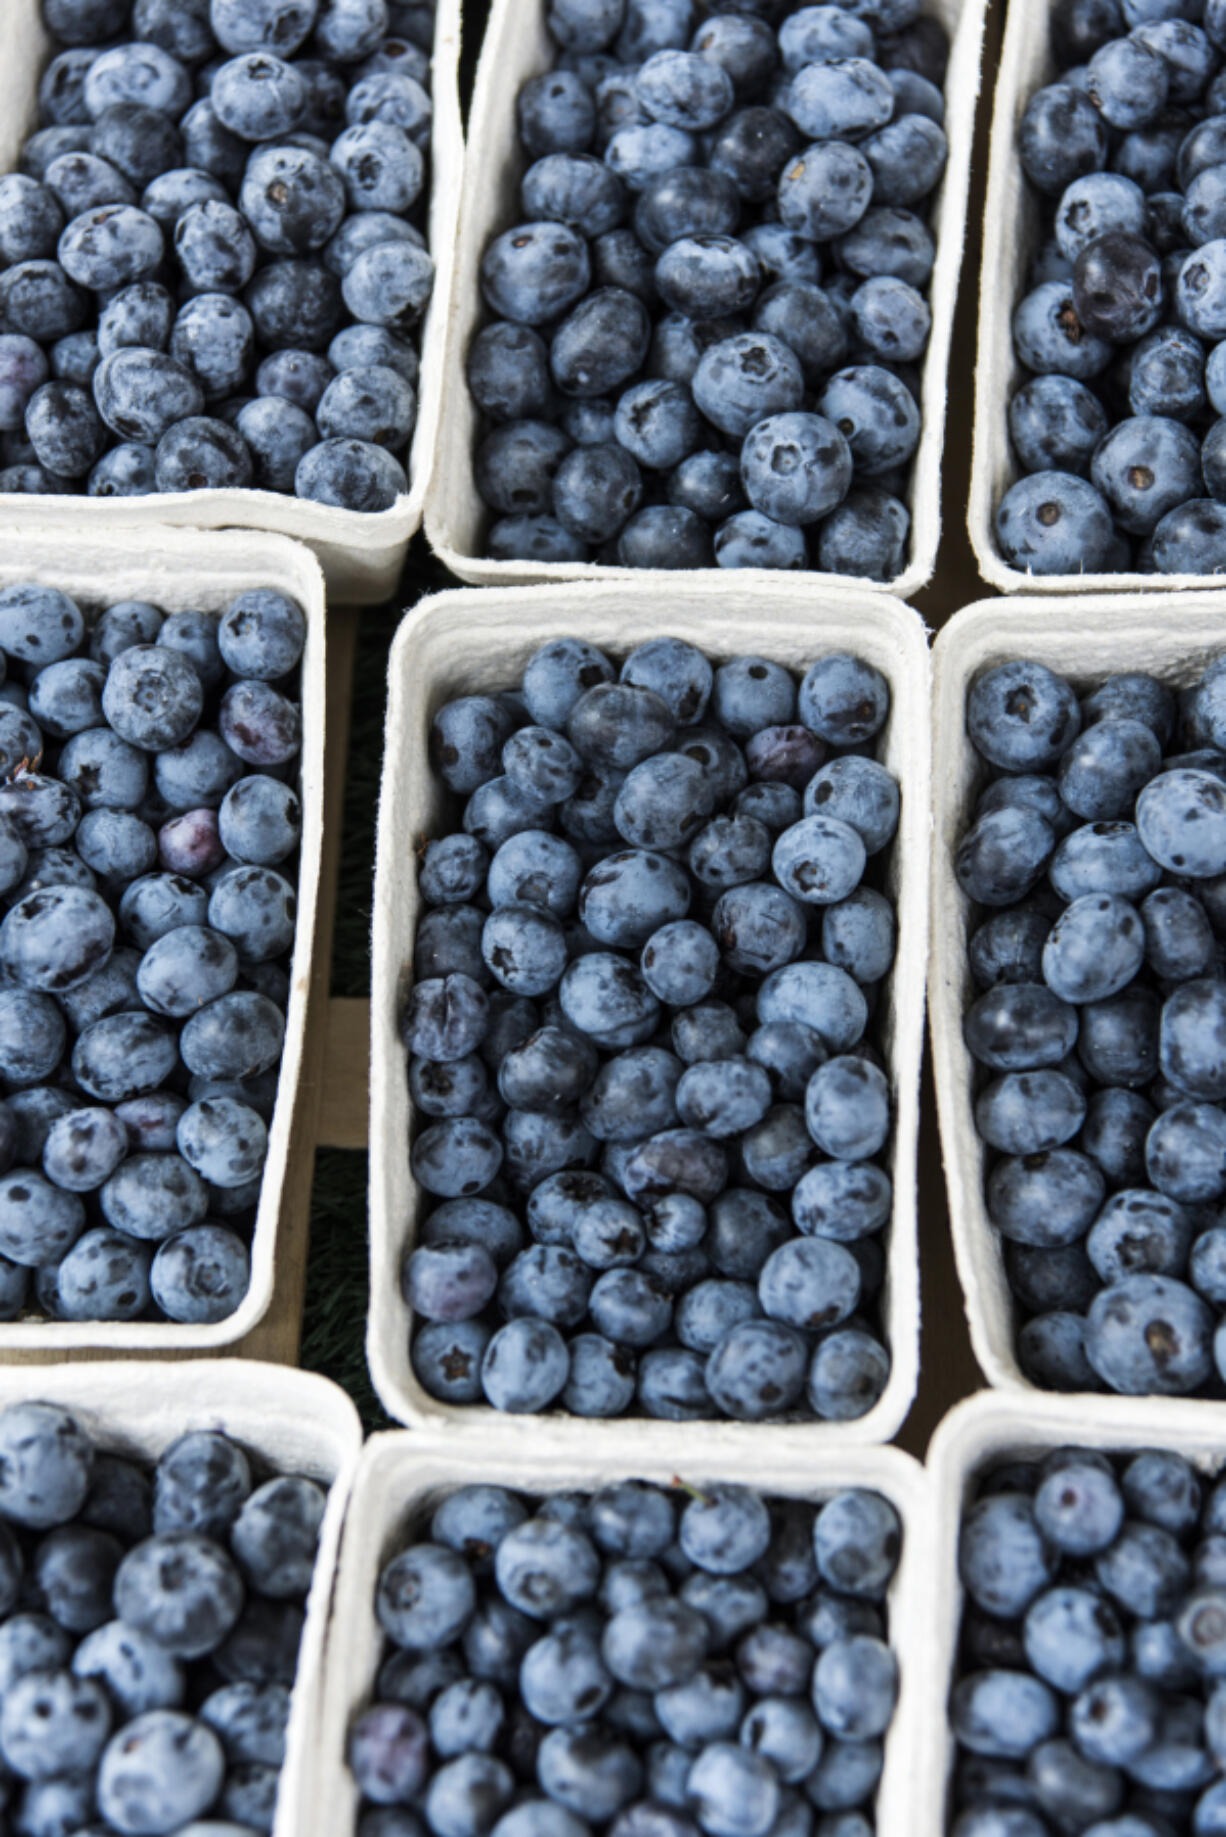 It is no secret that blueberries are good for you.